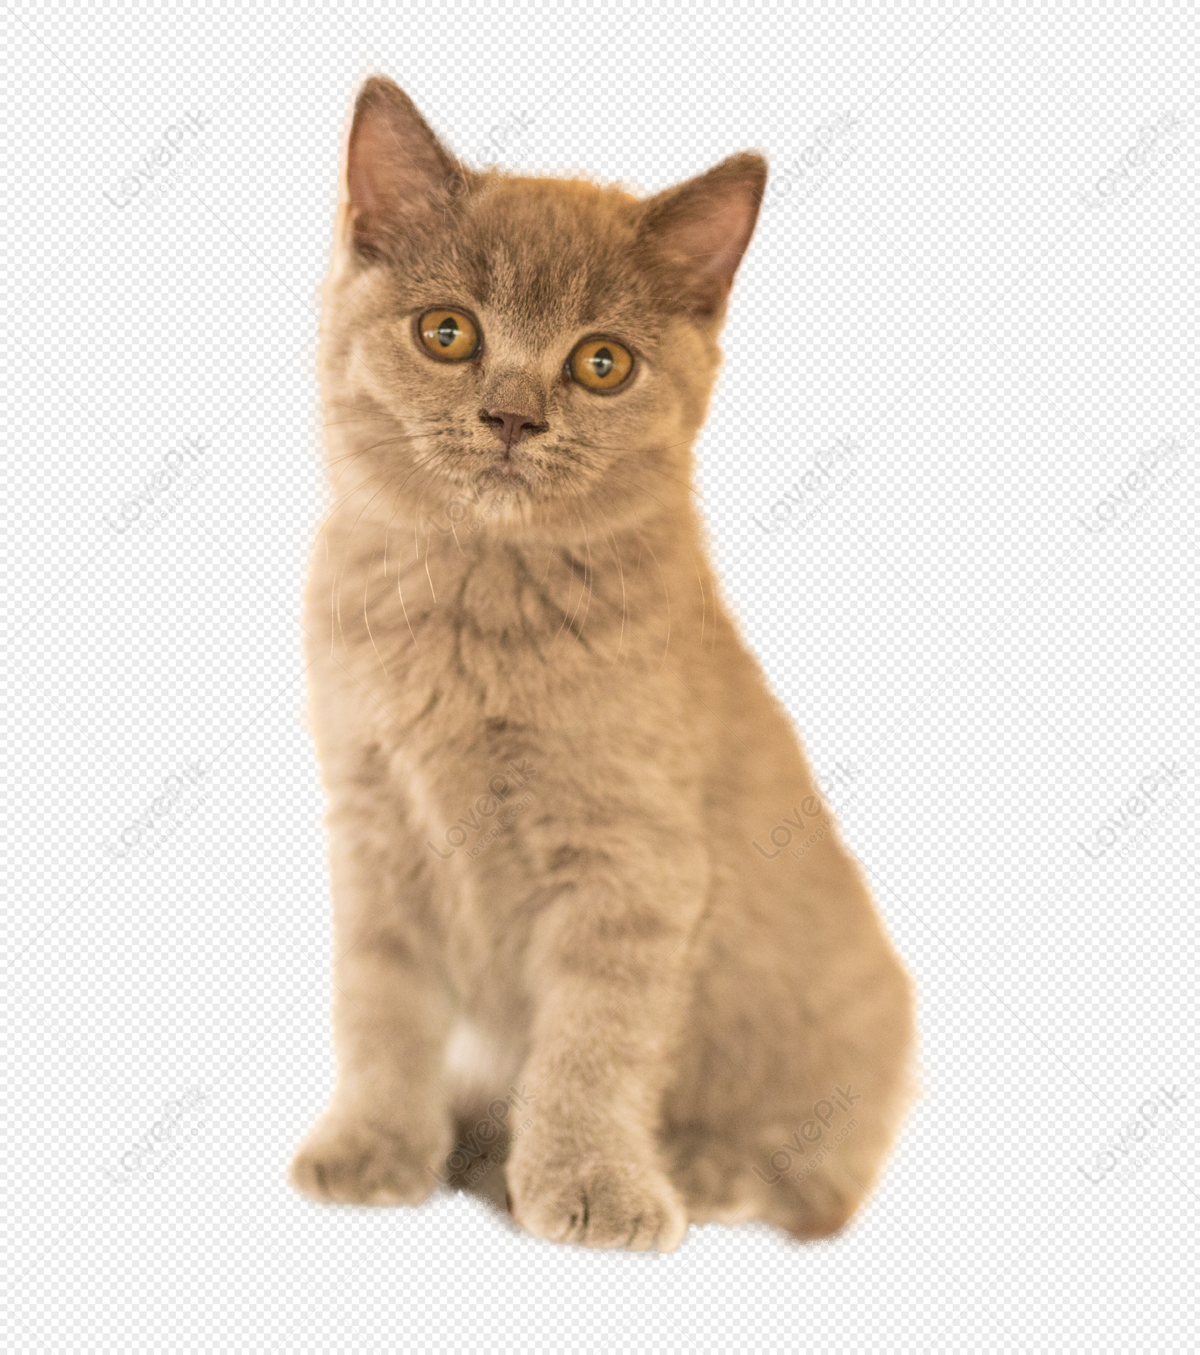 Cat PNG Images With Transparent Background | Free Download On Lovepik